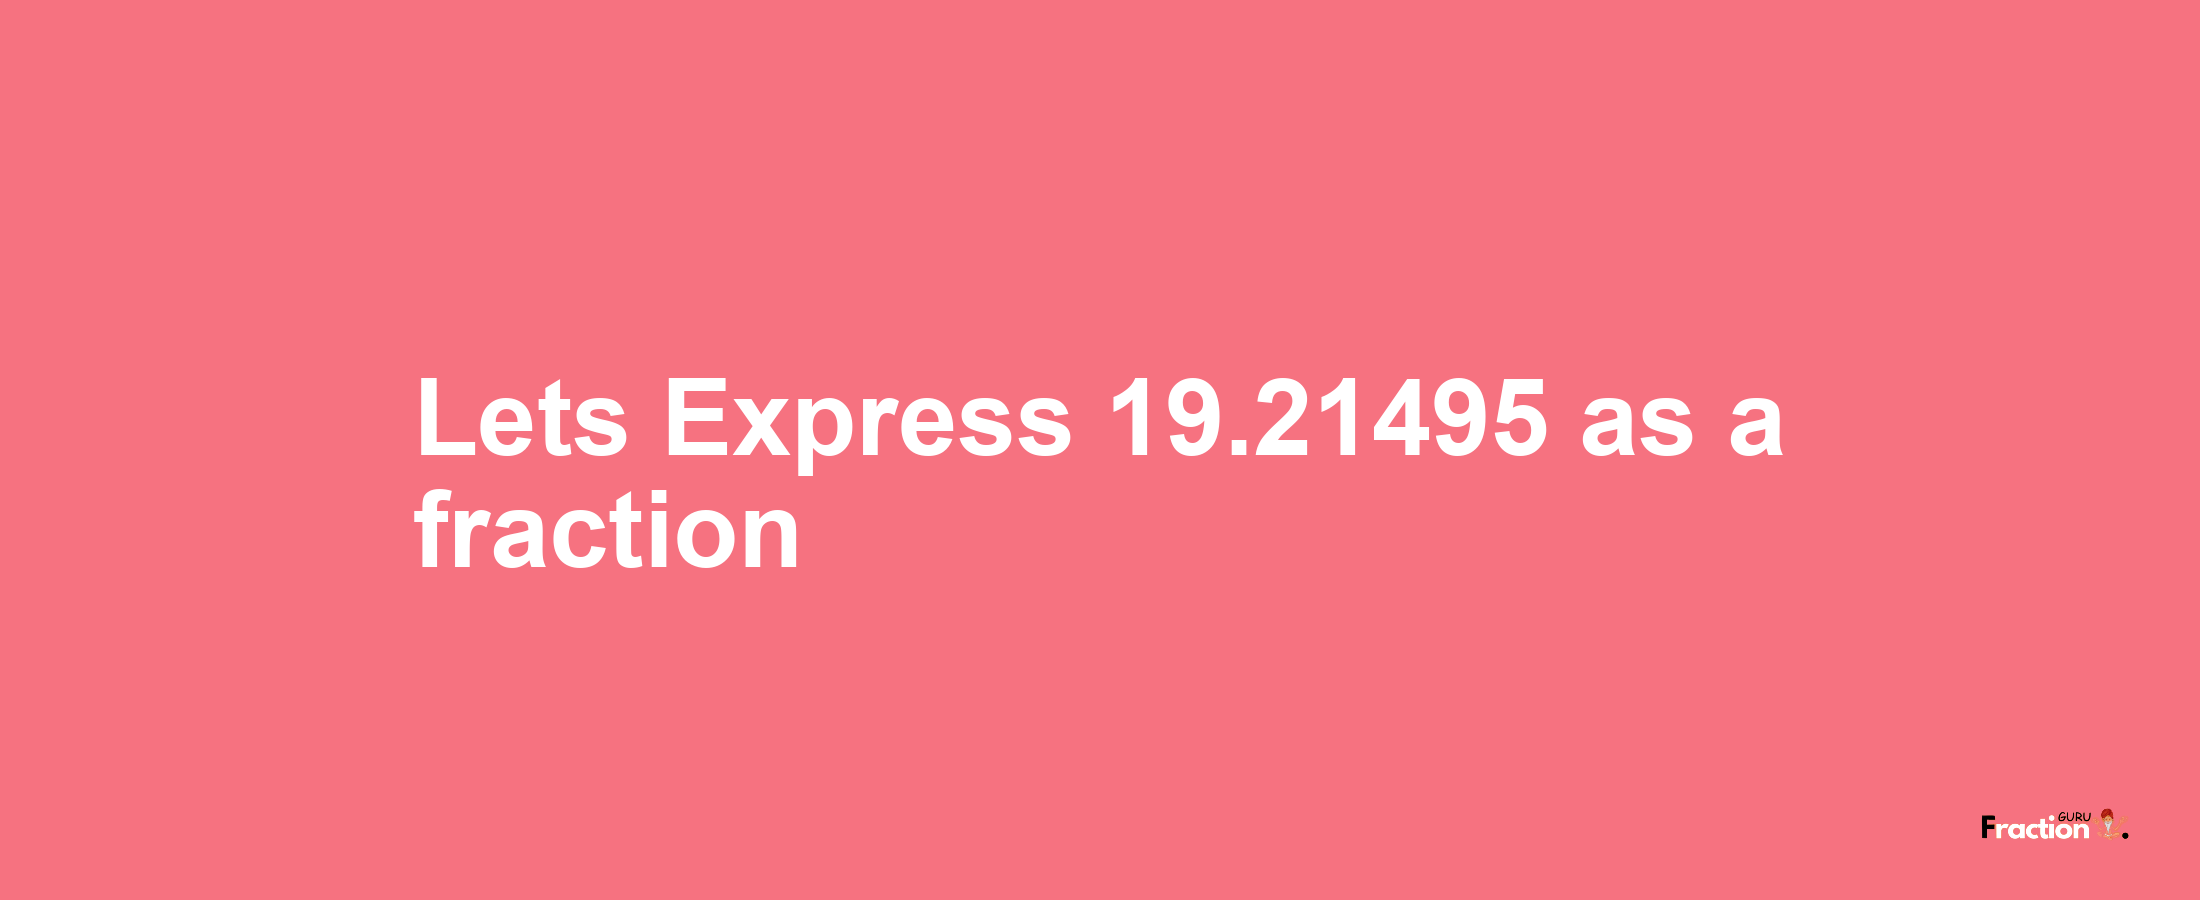 Lets Express 19.21495 as afraction